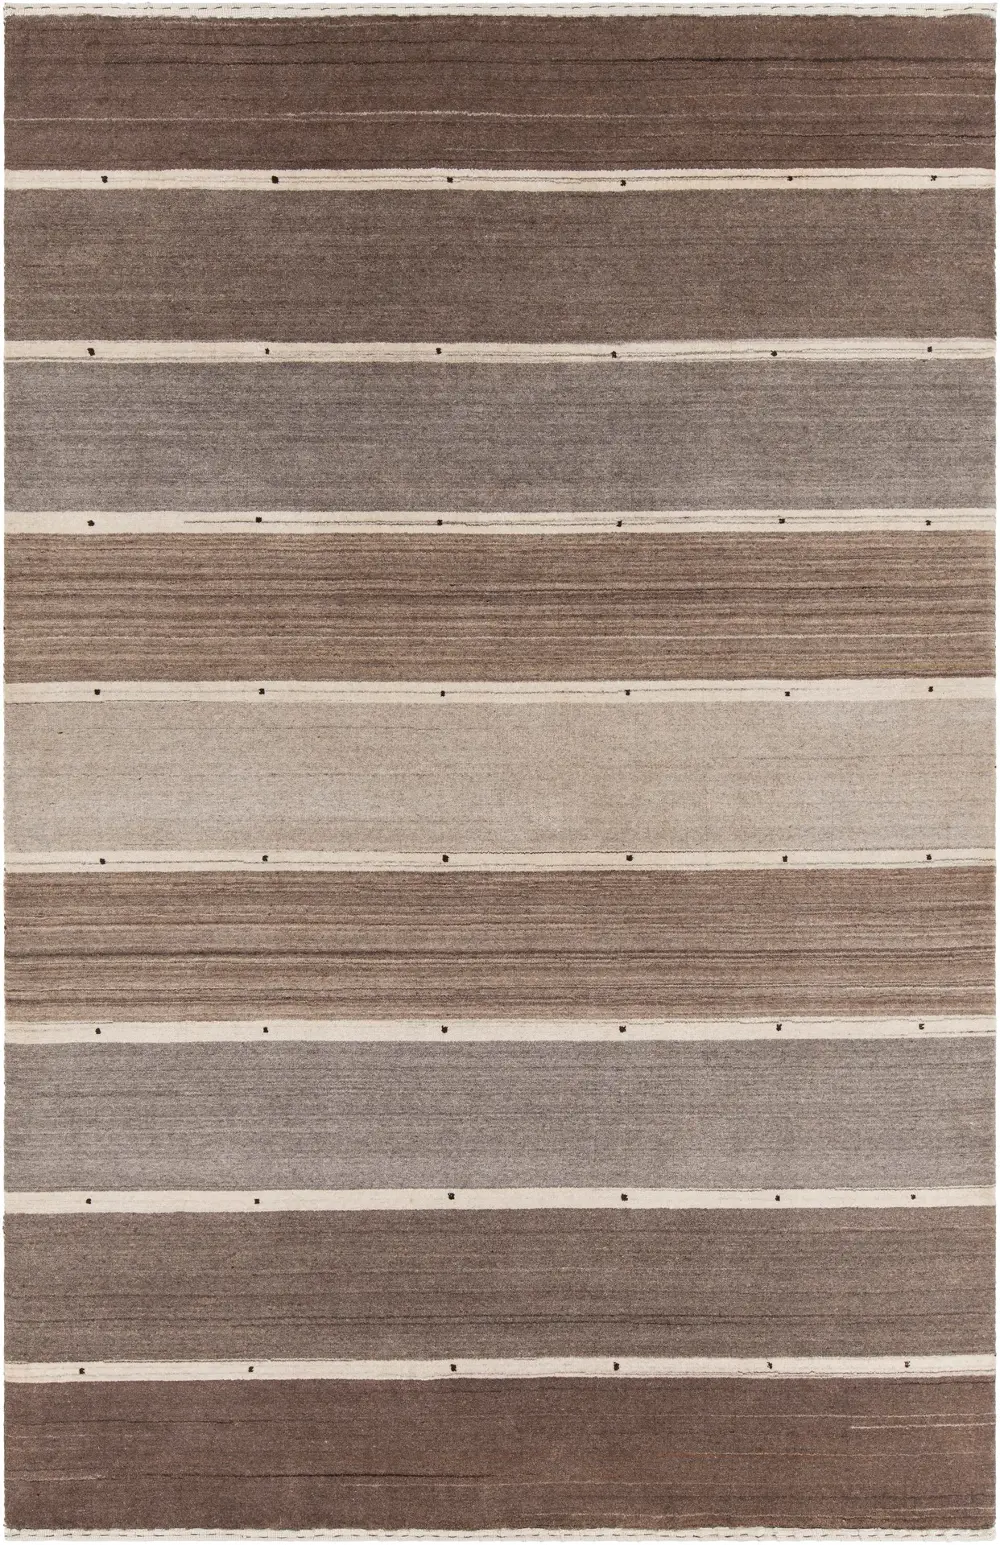 8 x 10 Large Narrow Striped Brown and Beige Area Rug - Elantra-1